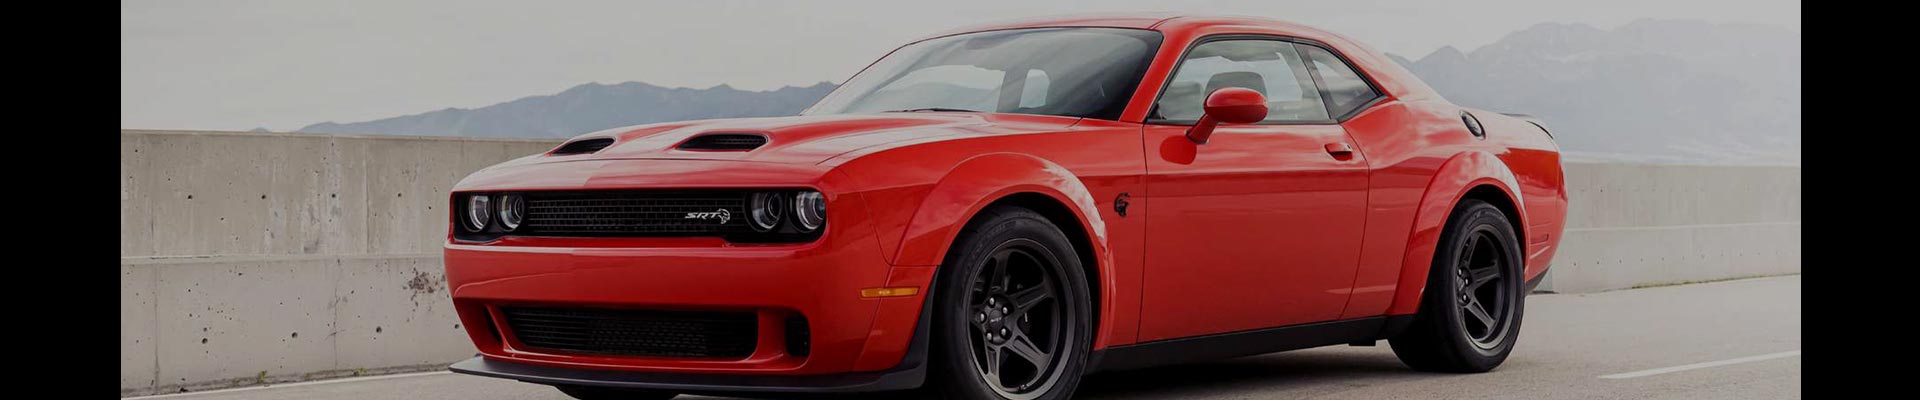 Shop Replacement and OEM 2008 Dodge Challenger Parts with Discounted Price on the Net